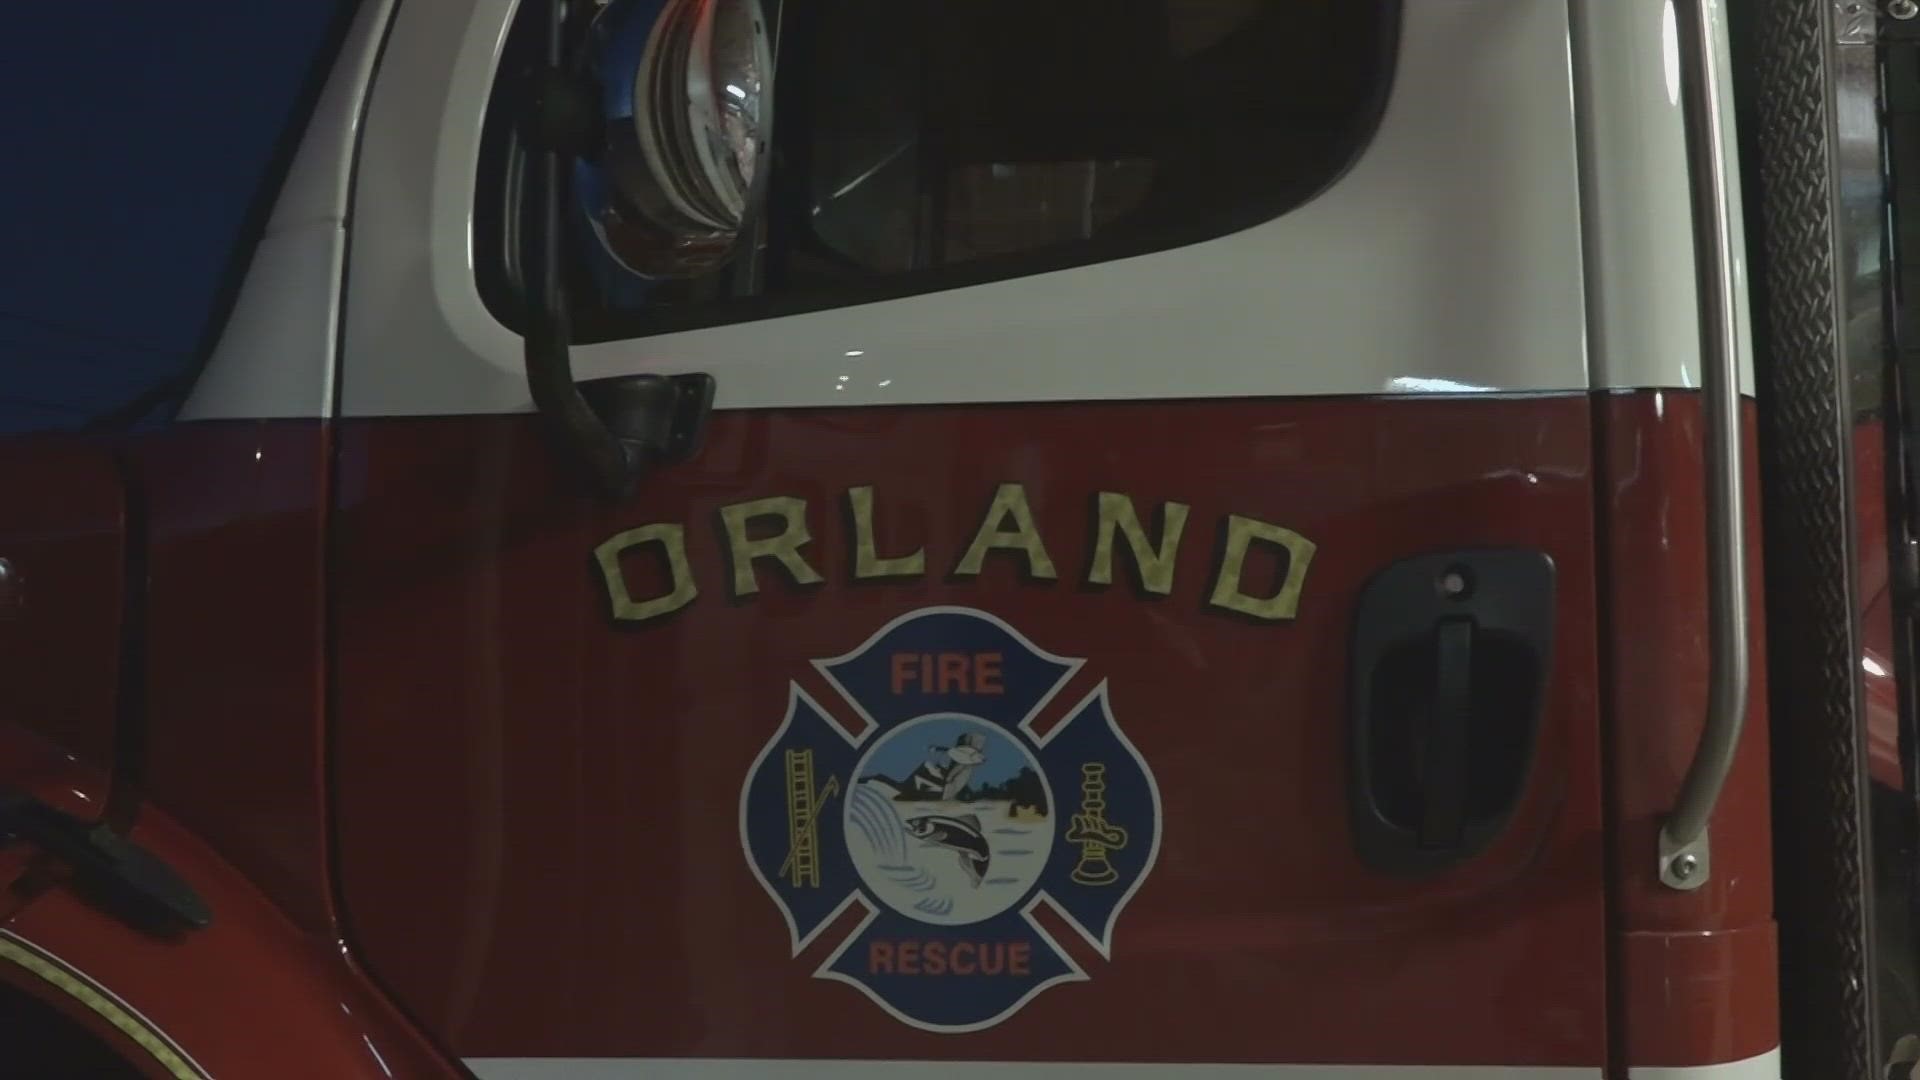 A proposal for a new fire station in Orland slated to cost $4 million was passed on Wednesday.